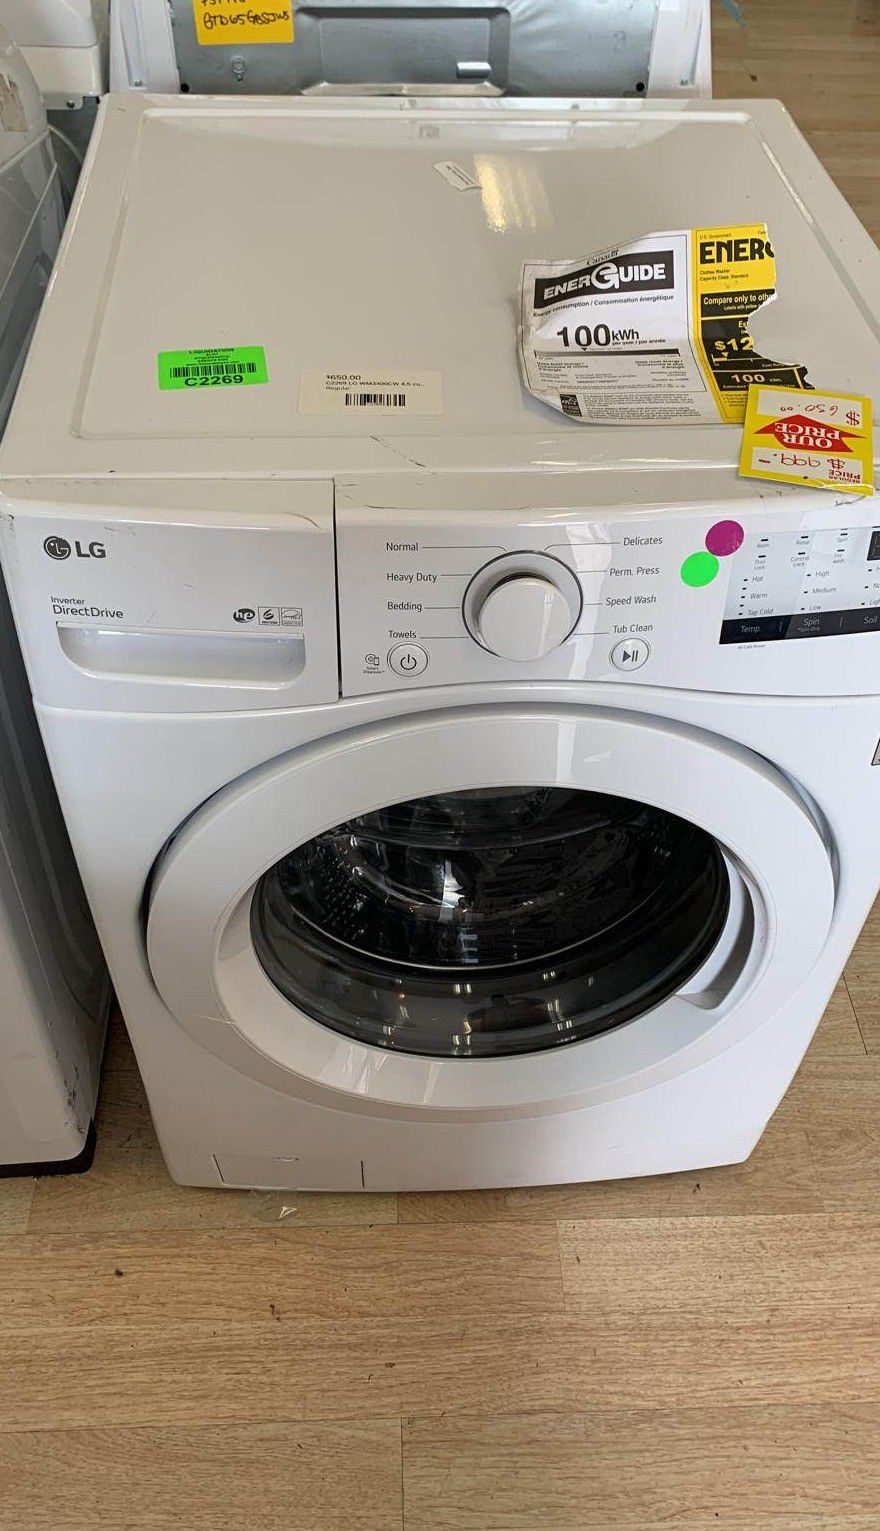 LG WMCW 4.5 cu. ft. Ultra Large Capacity White Front Load Washer UP4Z4